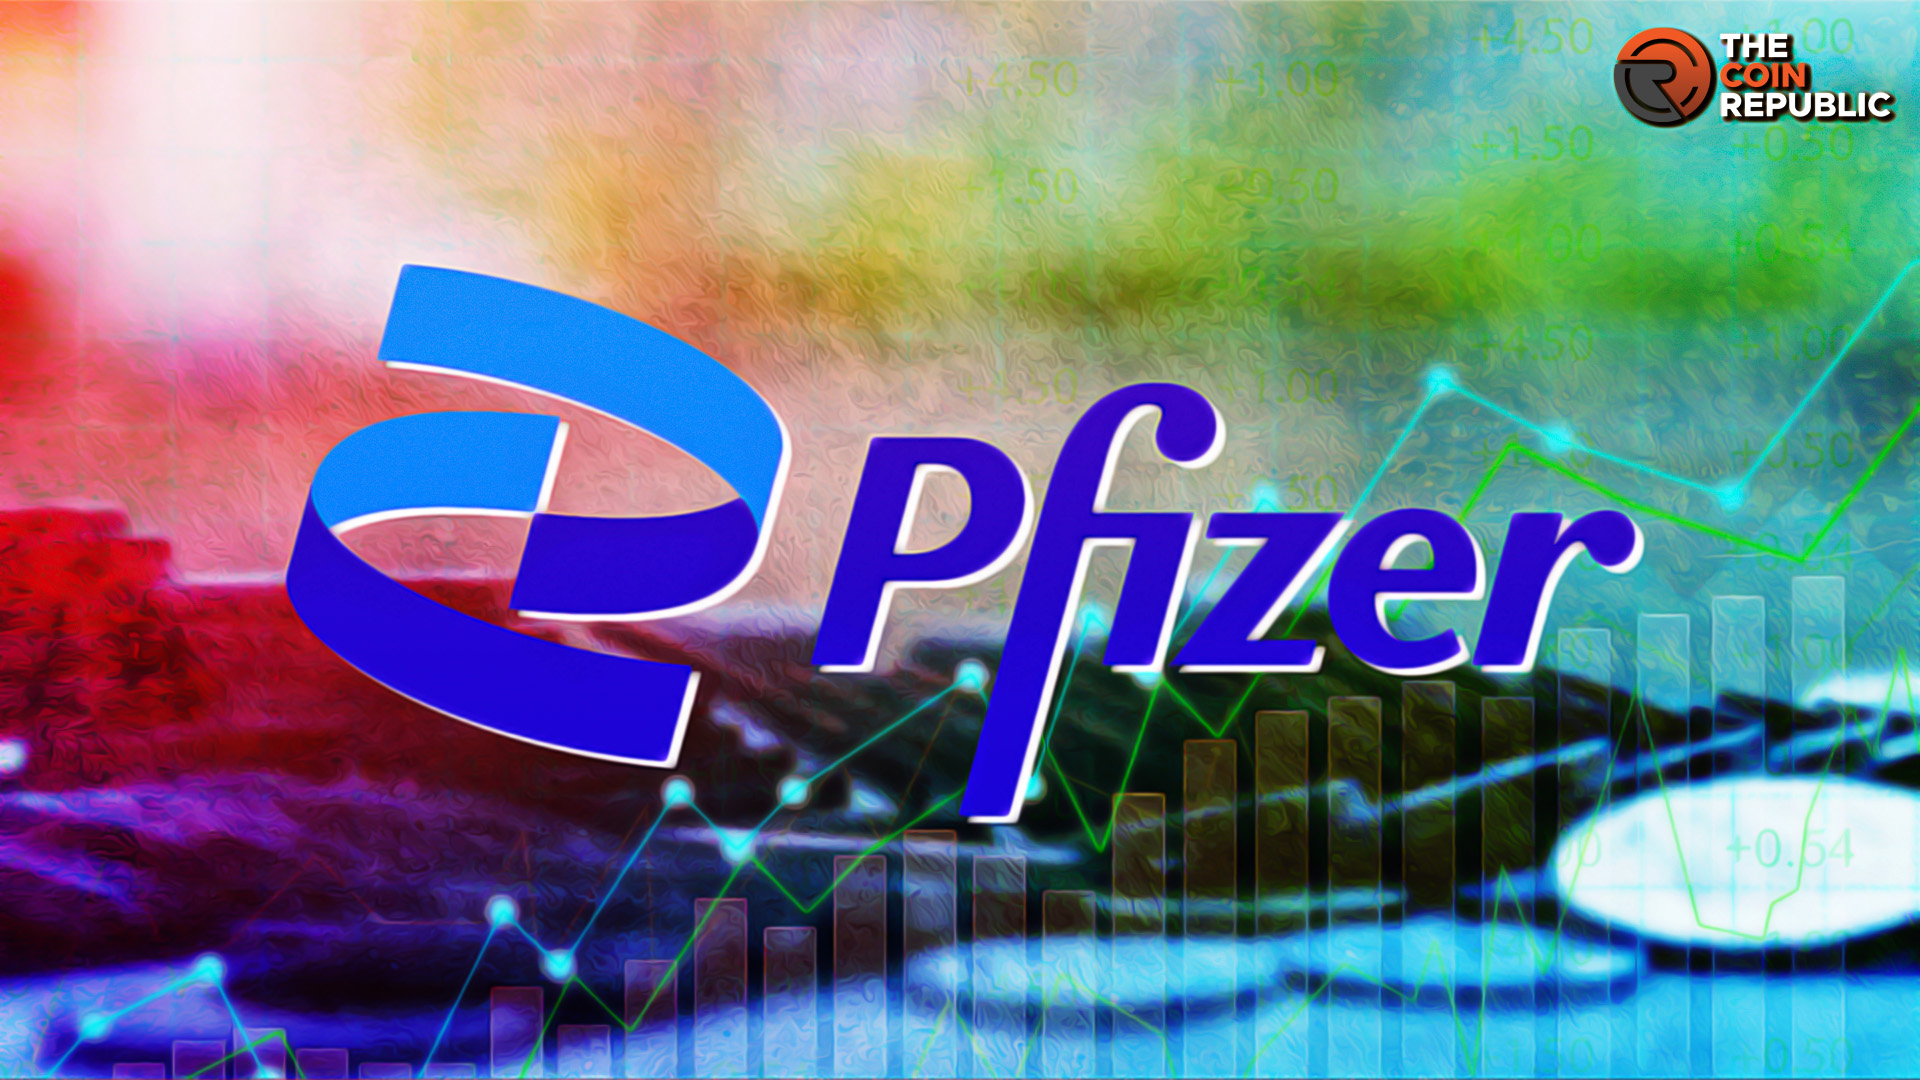 Pfizer Stock Price Has Potential to Reach $75, Suggests Analysts